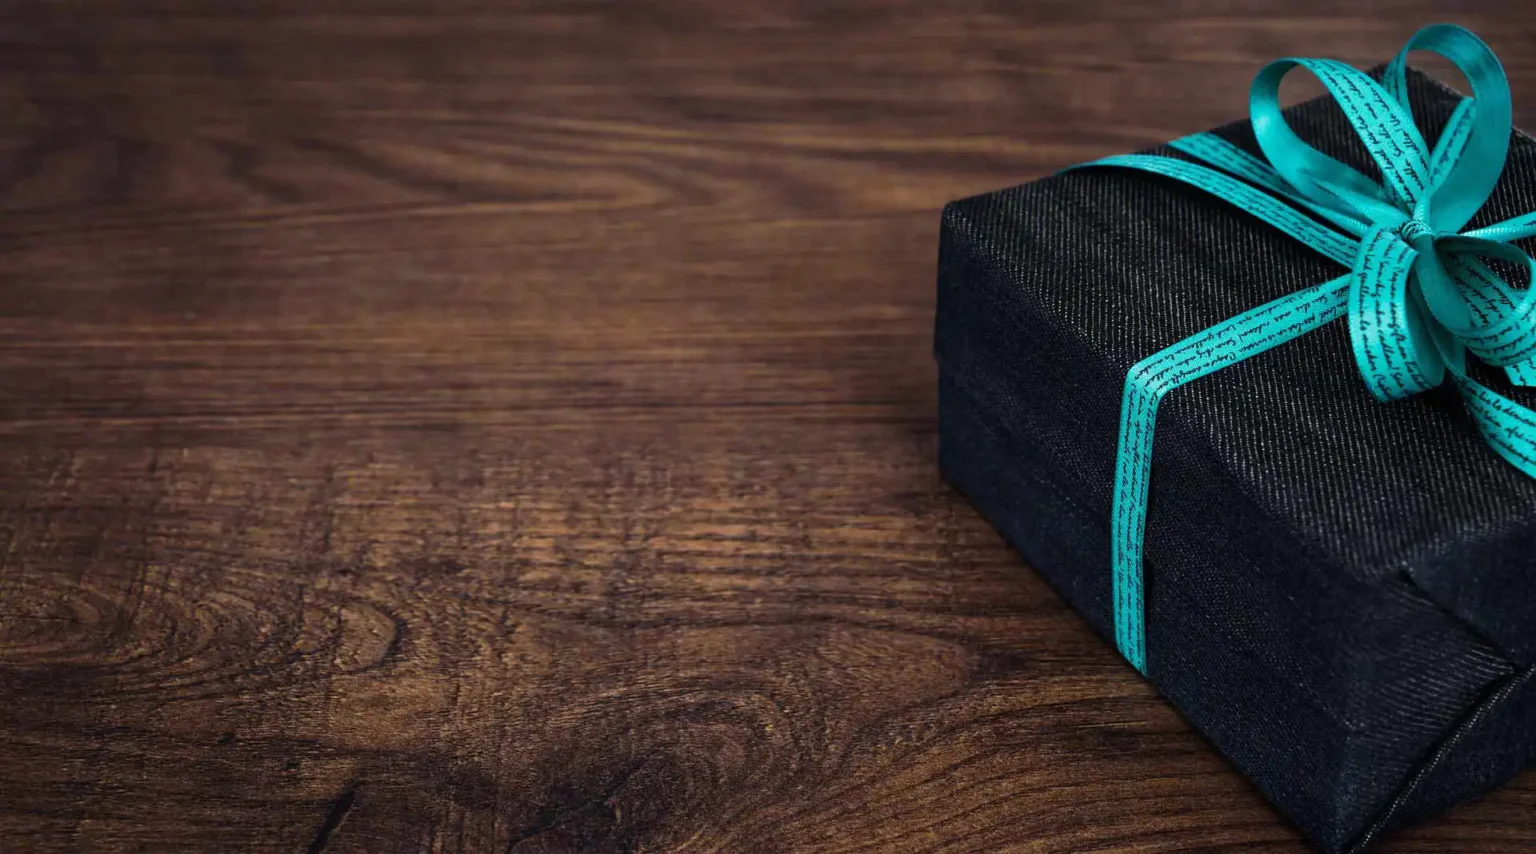 In the picture there is half of a small gift box with a black paper and a light blue ribbon on a wooden table.